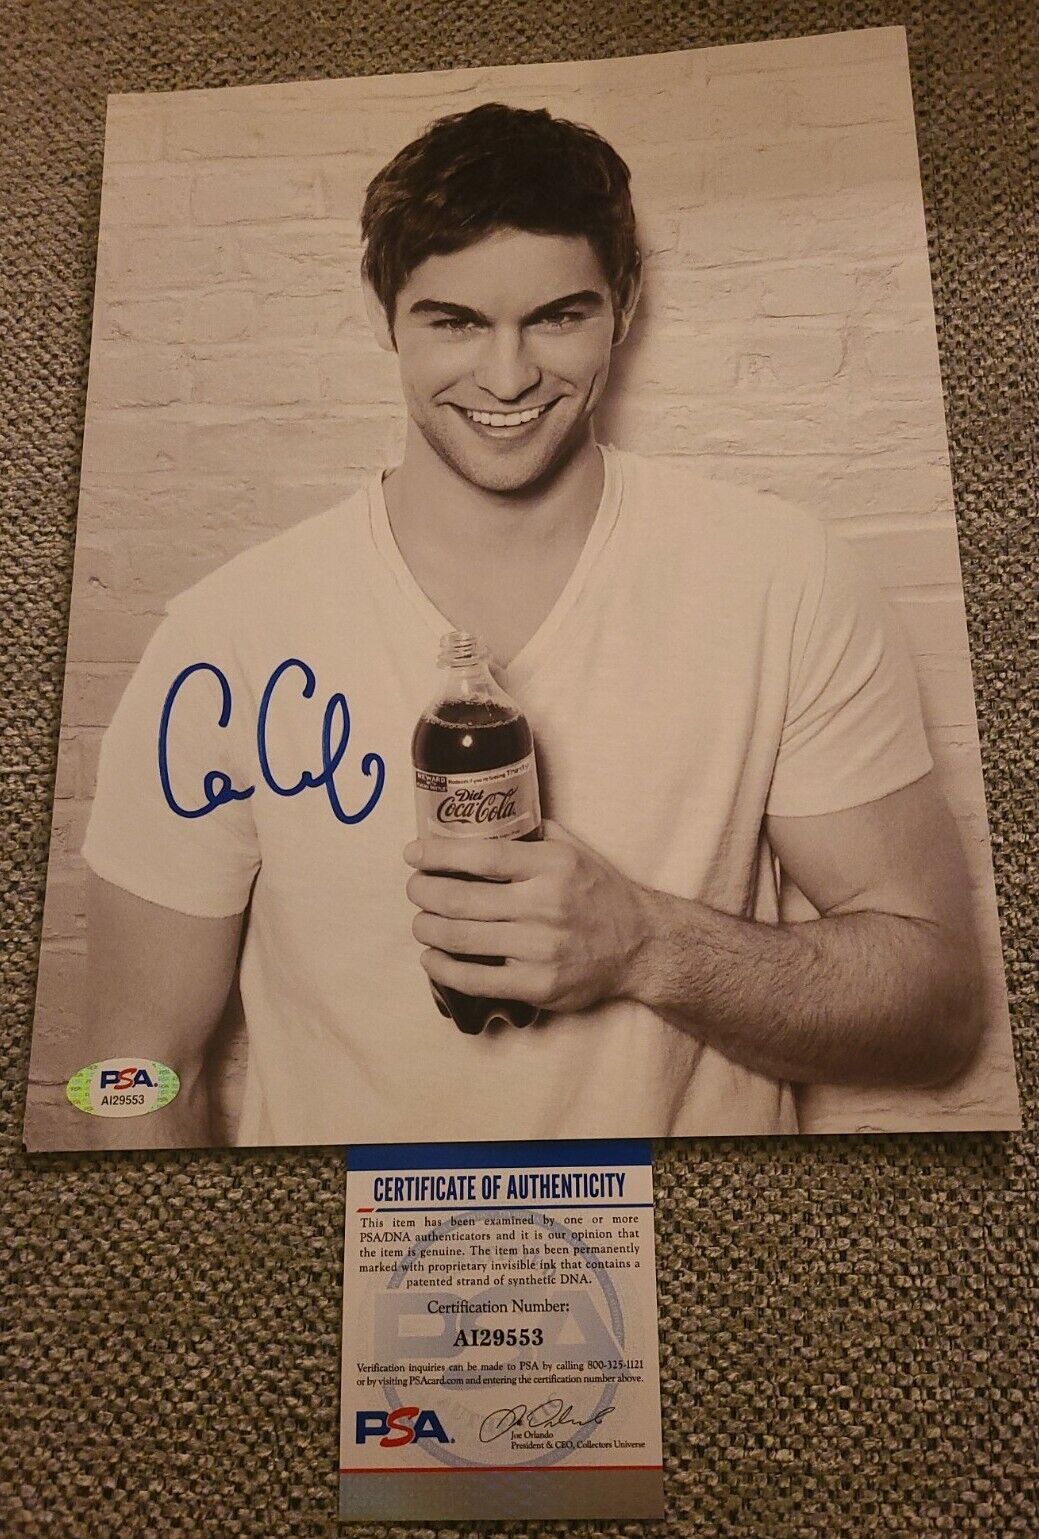 CHACE CRAWFORD SIGNED 8X10 PHOTO SEXY GOSSIP GIRL PSA/DNA AUTHENTICATED #AI29553